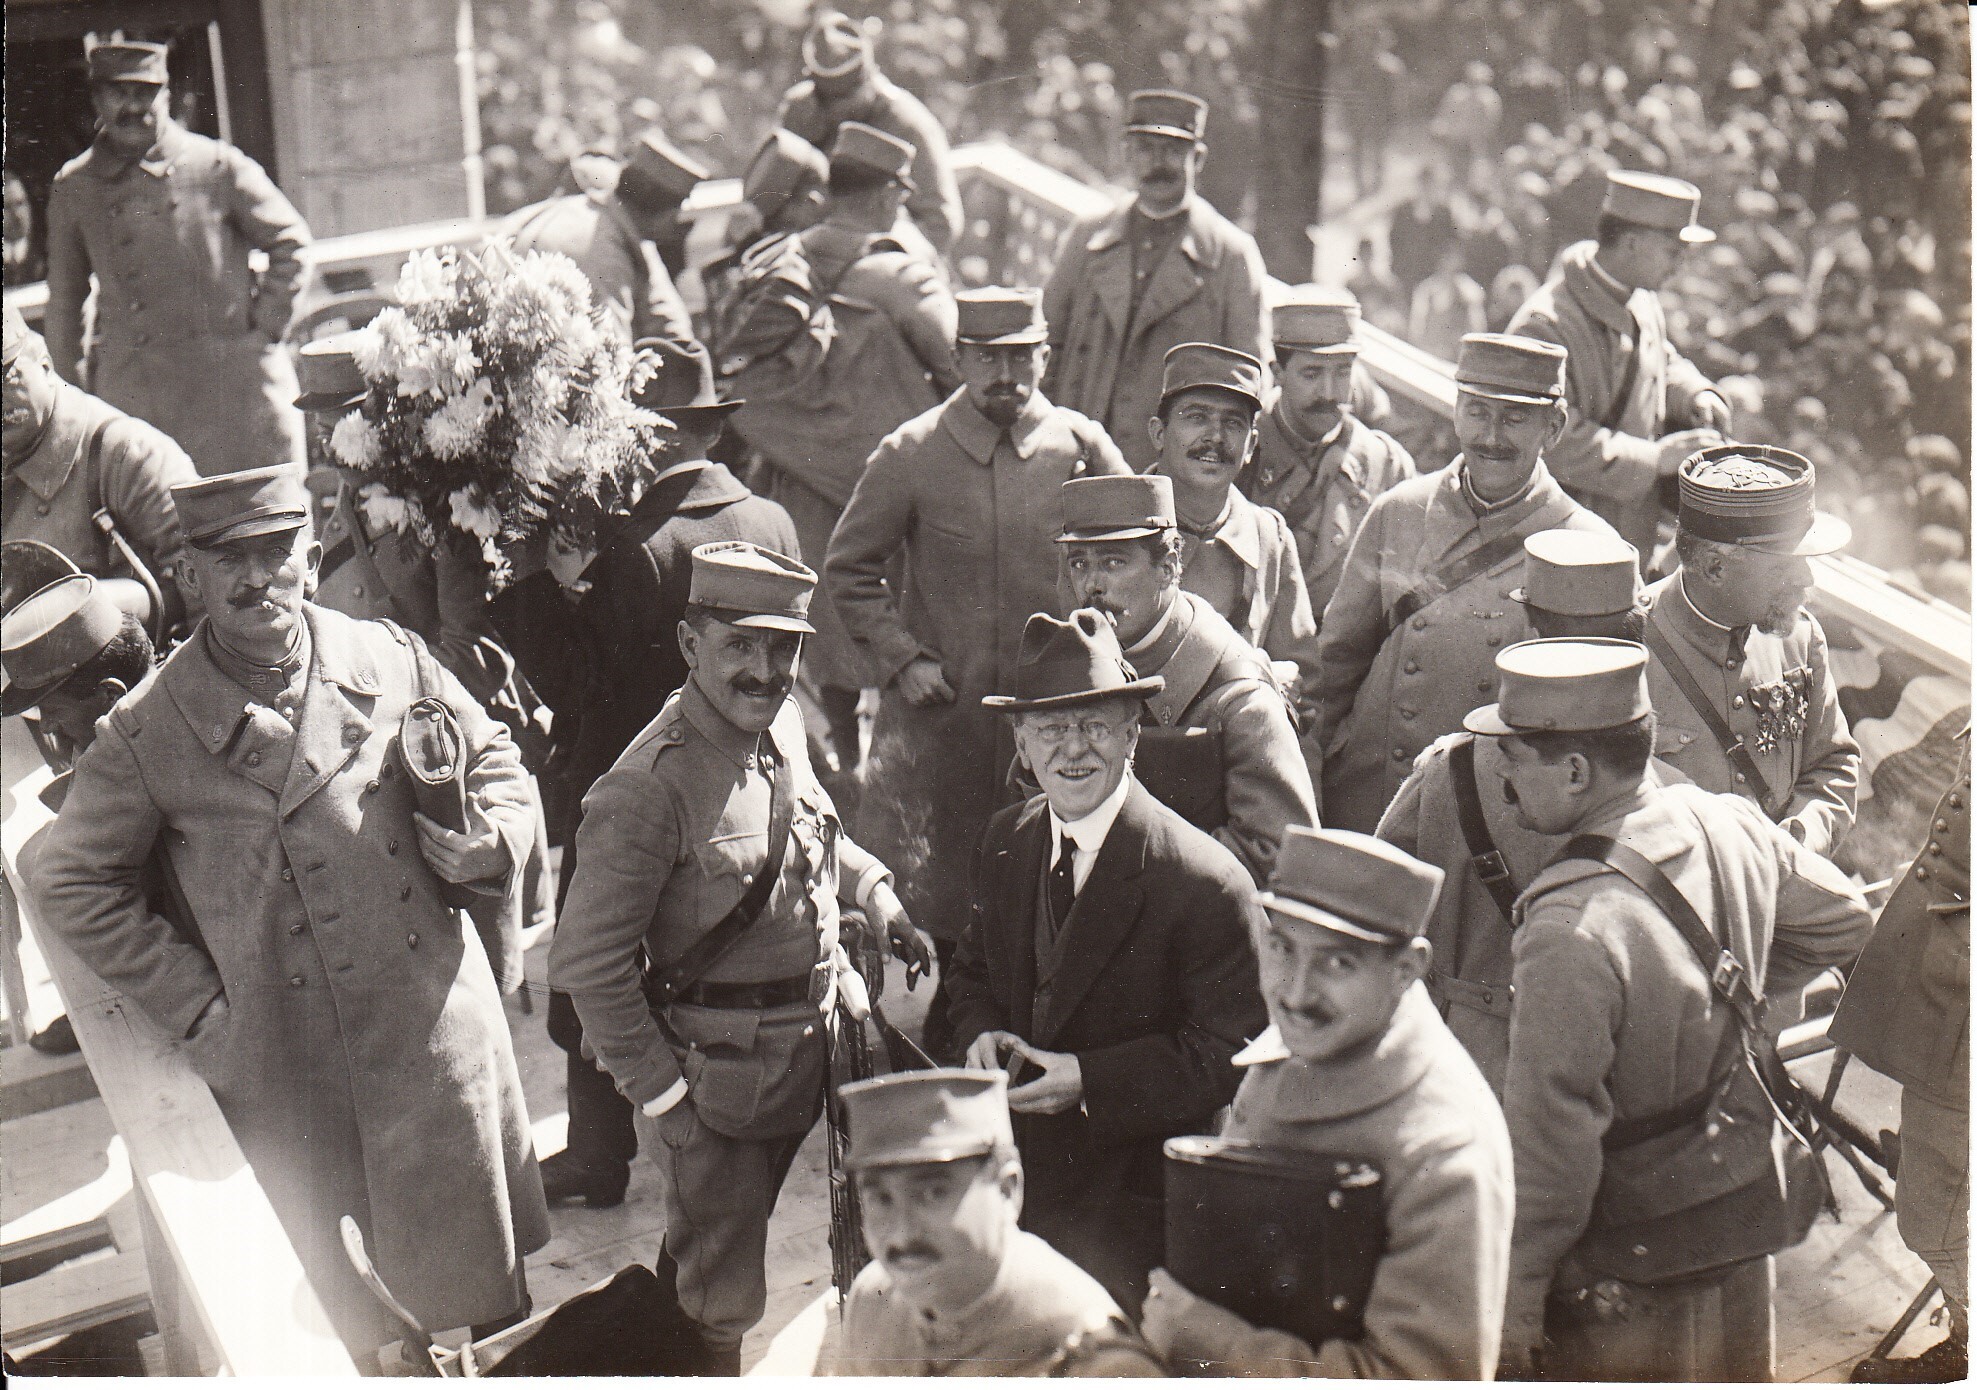 William H. Meadowcroft and French Army band at Liberty Loan rally.